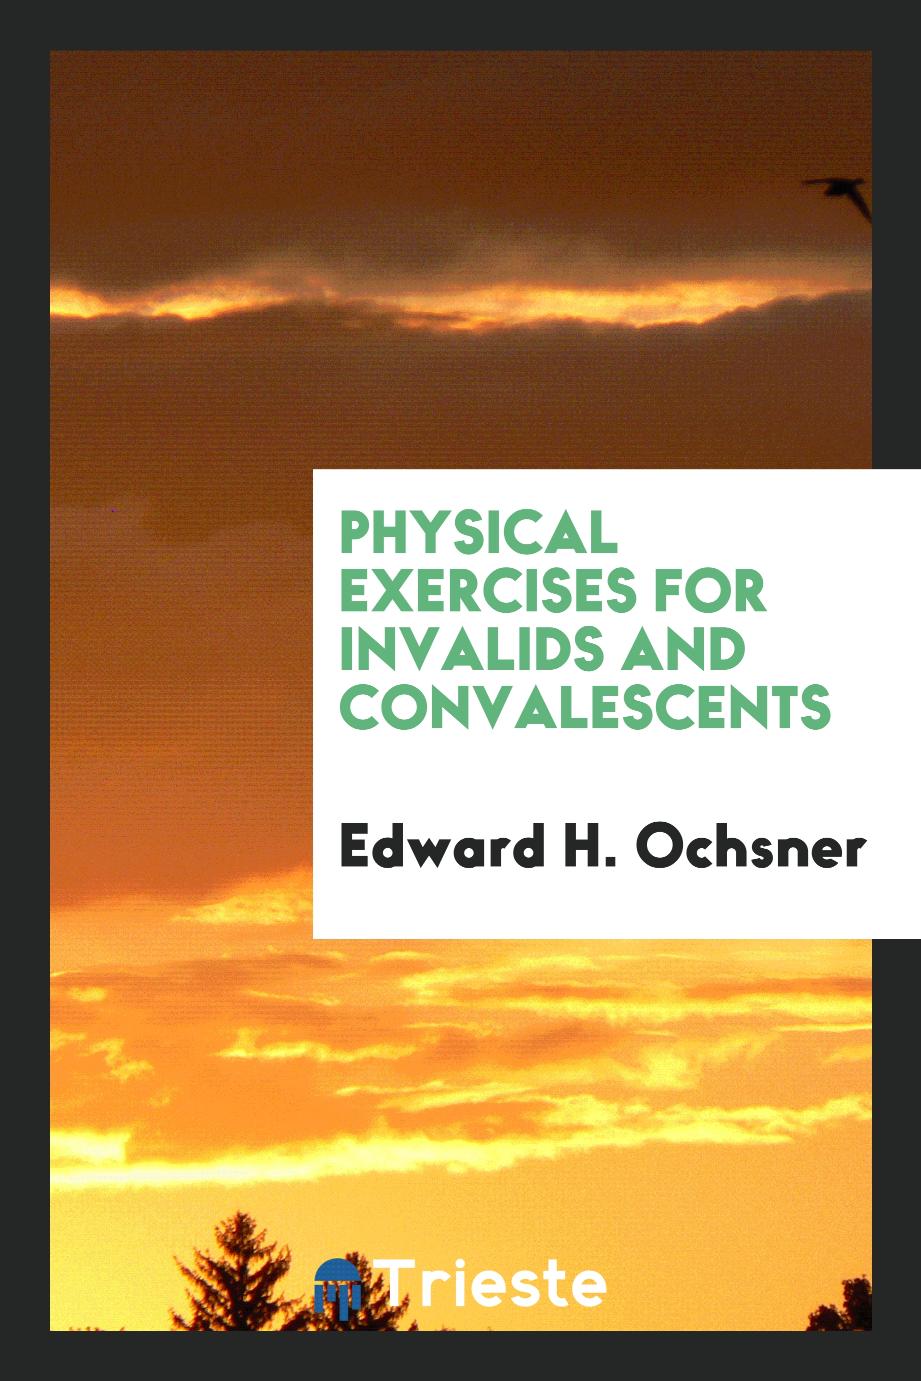 Physical exercises for invalids and convalescents